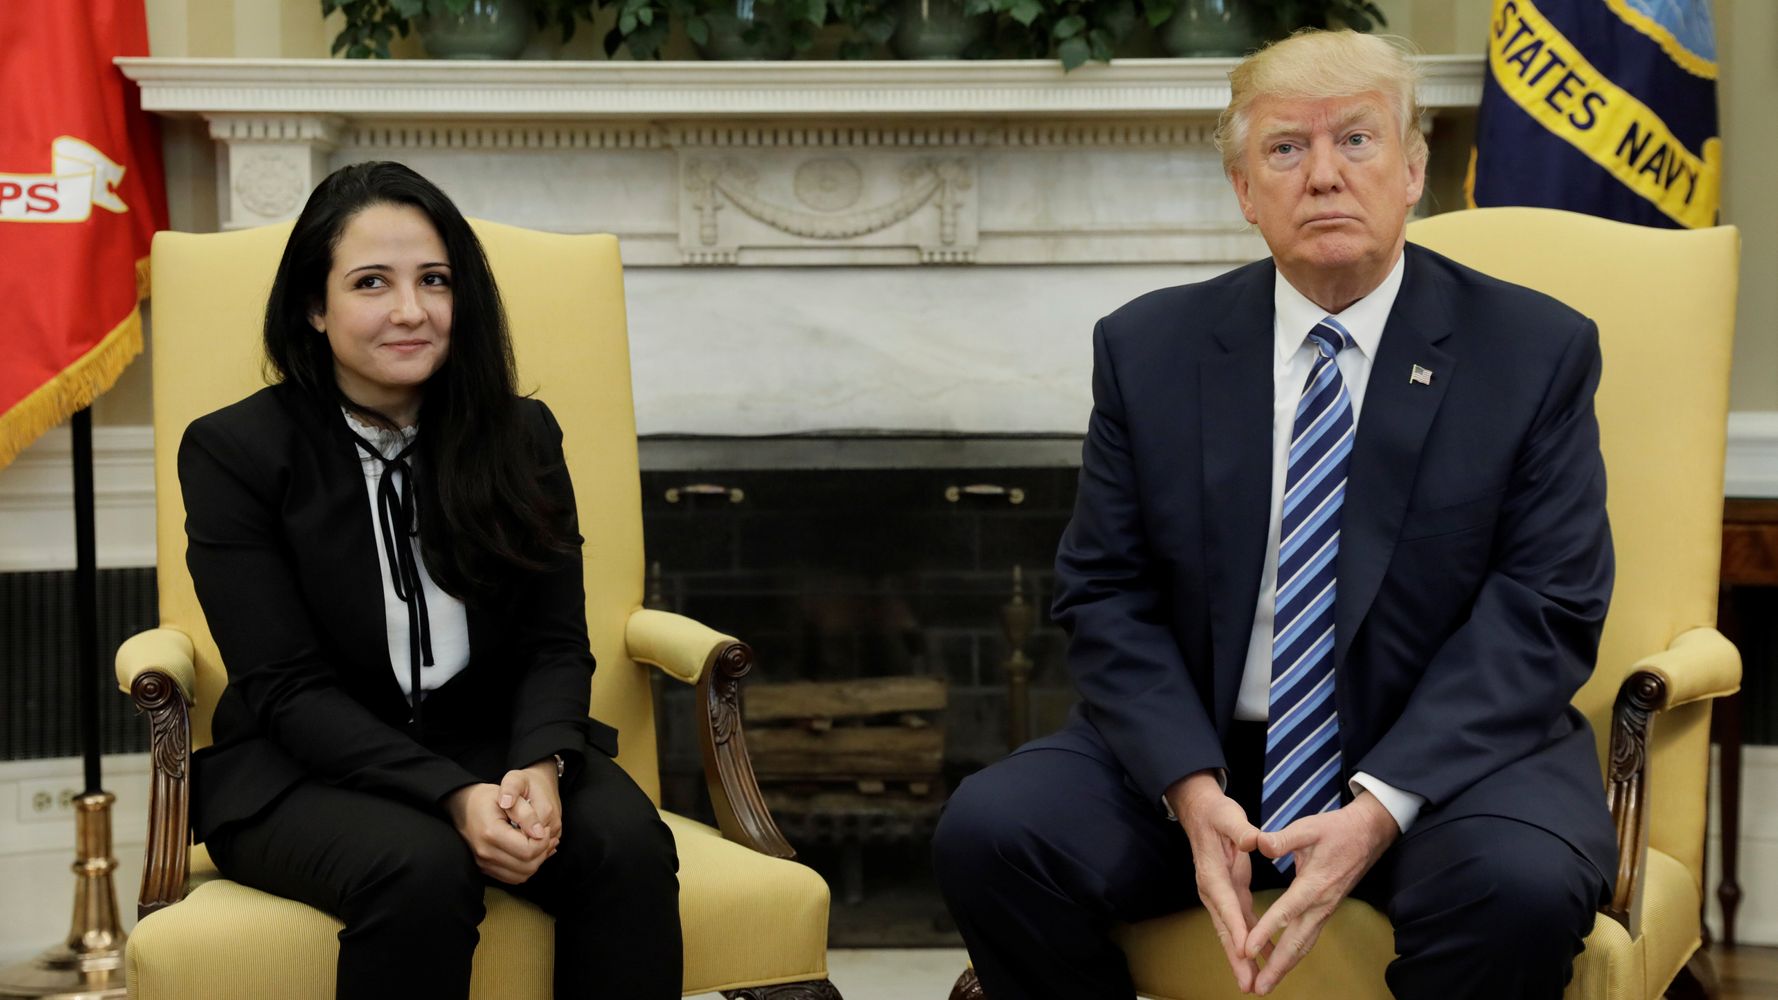 Former Prisoner Used By Trump As A Prop Declares Her Support For Biden